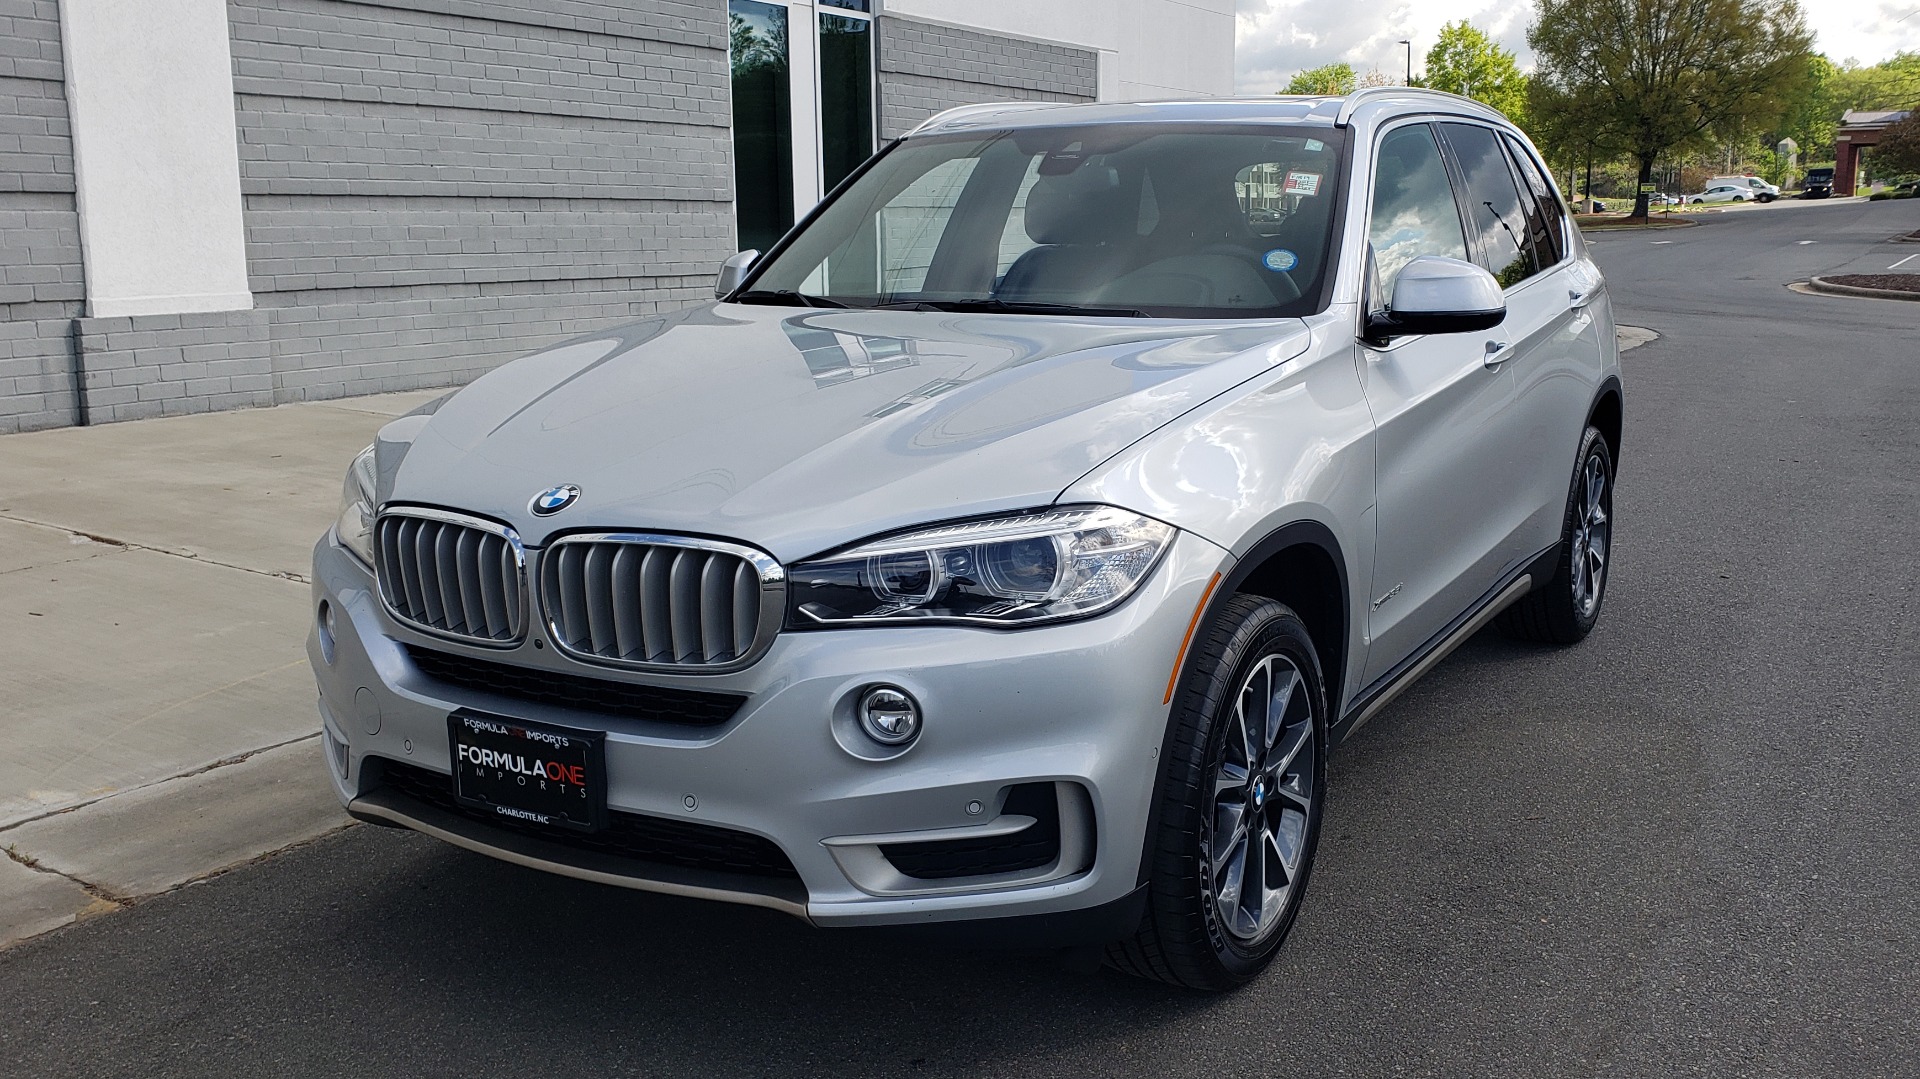 Used 2018 BMW X5 XDRIVE35I PREMIUM / NAV / PANO-ROOF / DRIVER ASST / REARVIEW for sale Sold at Formula Imports in Charlotte NC 28227 3